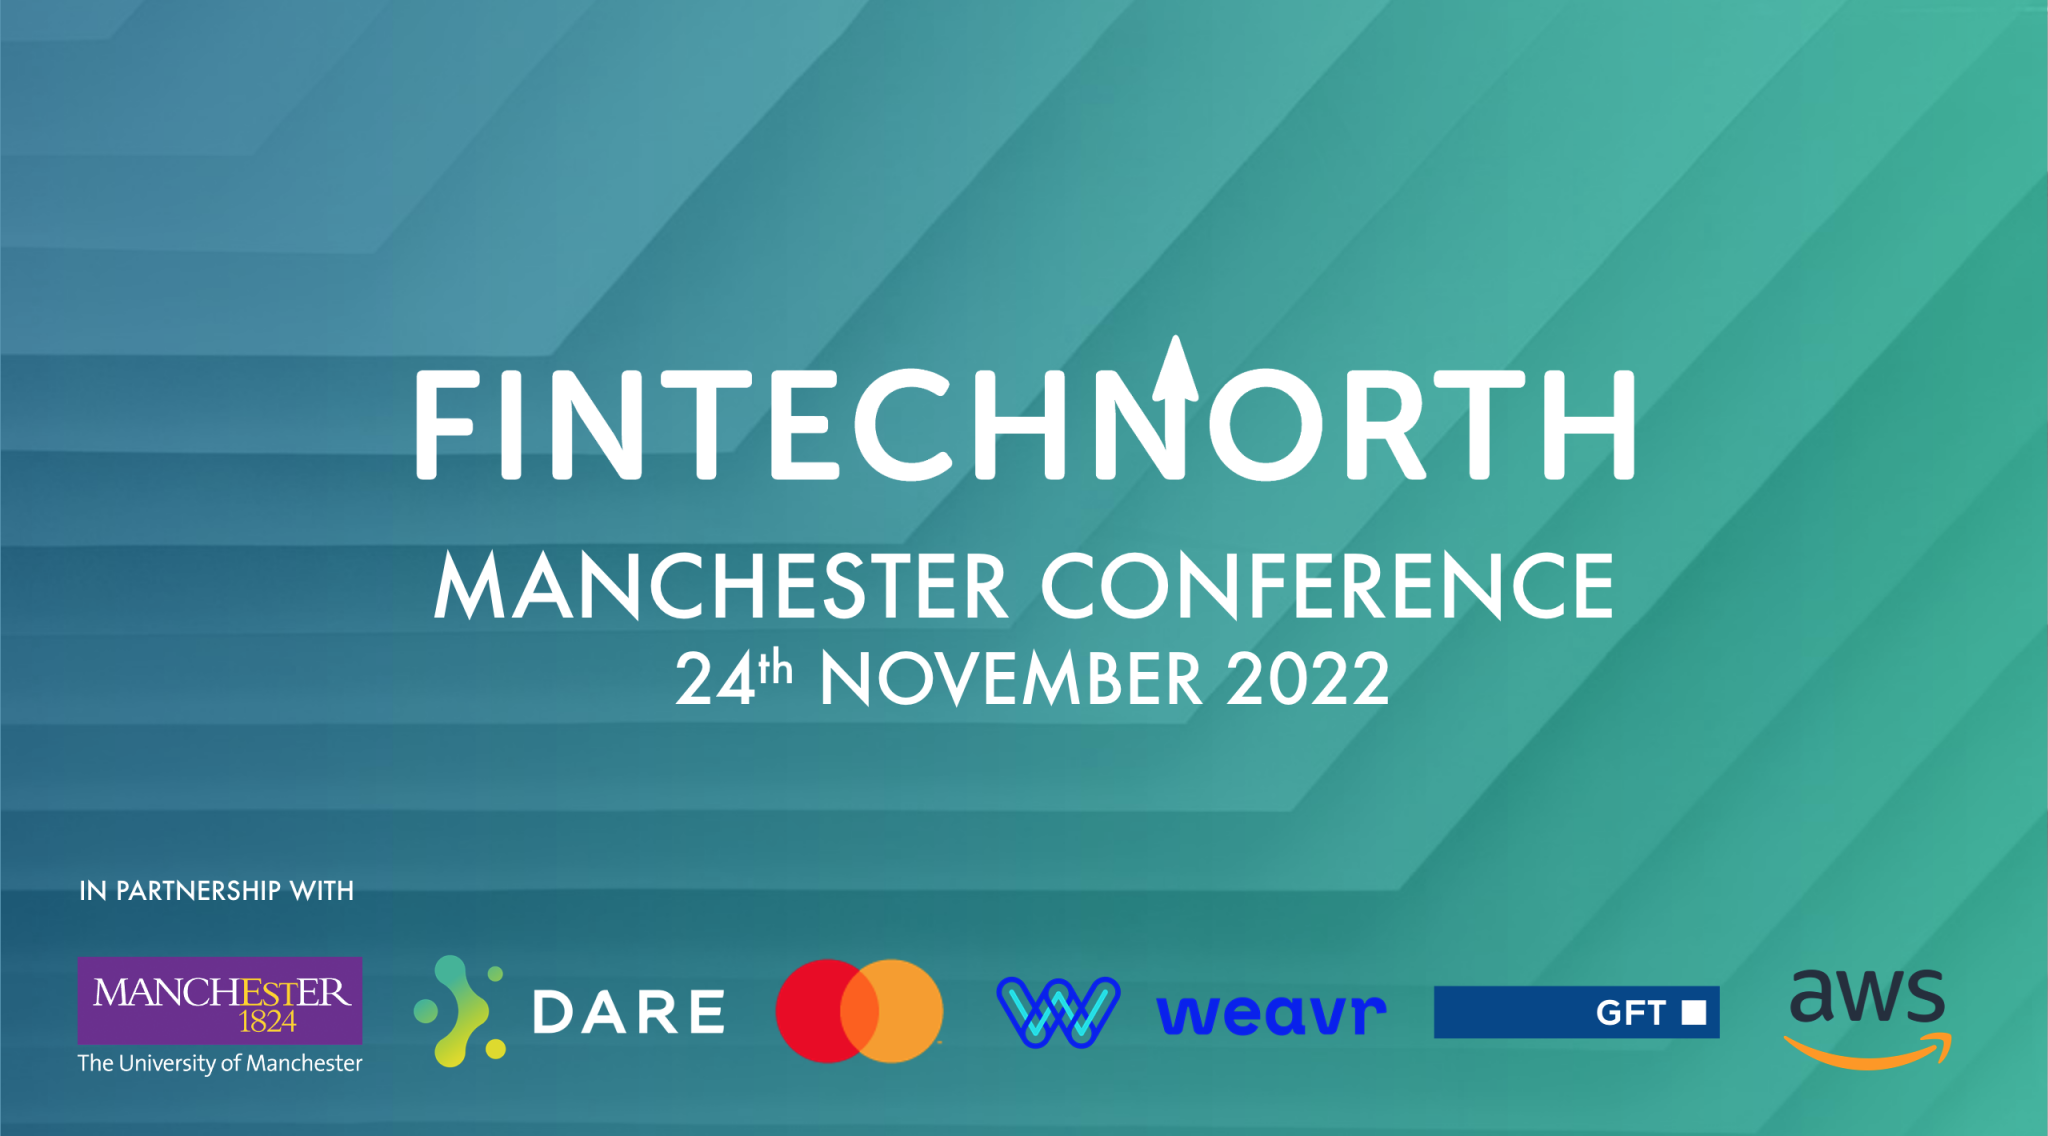 Established financial services and FinTech organisations to congregate and support at FinTech North’s Manchester Conference next month